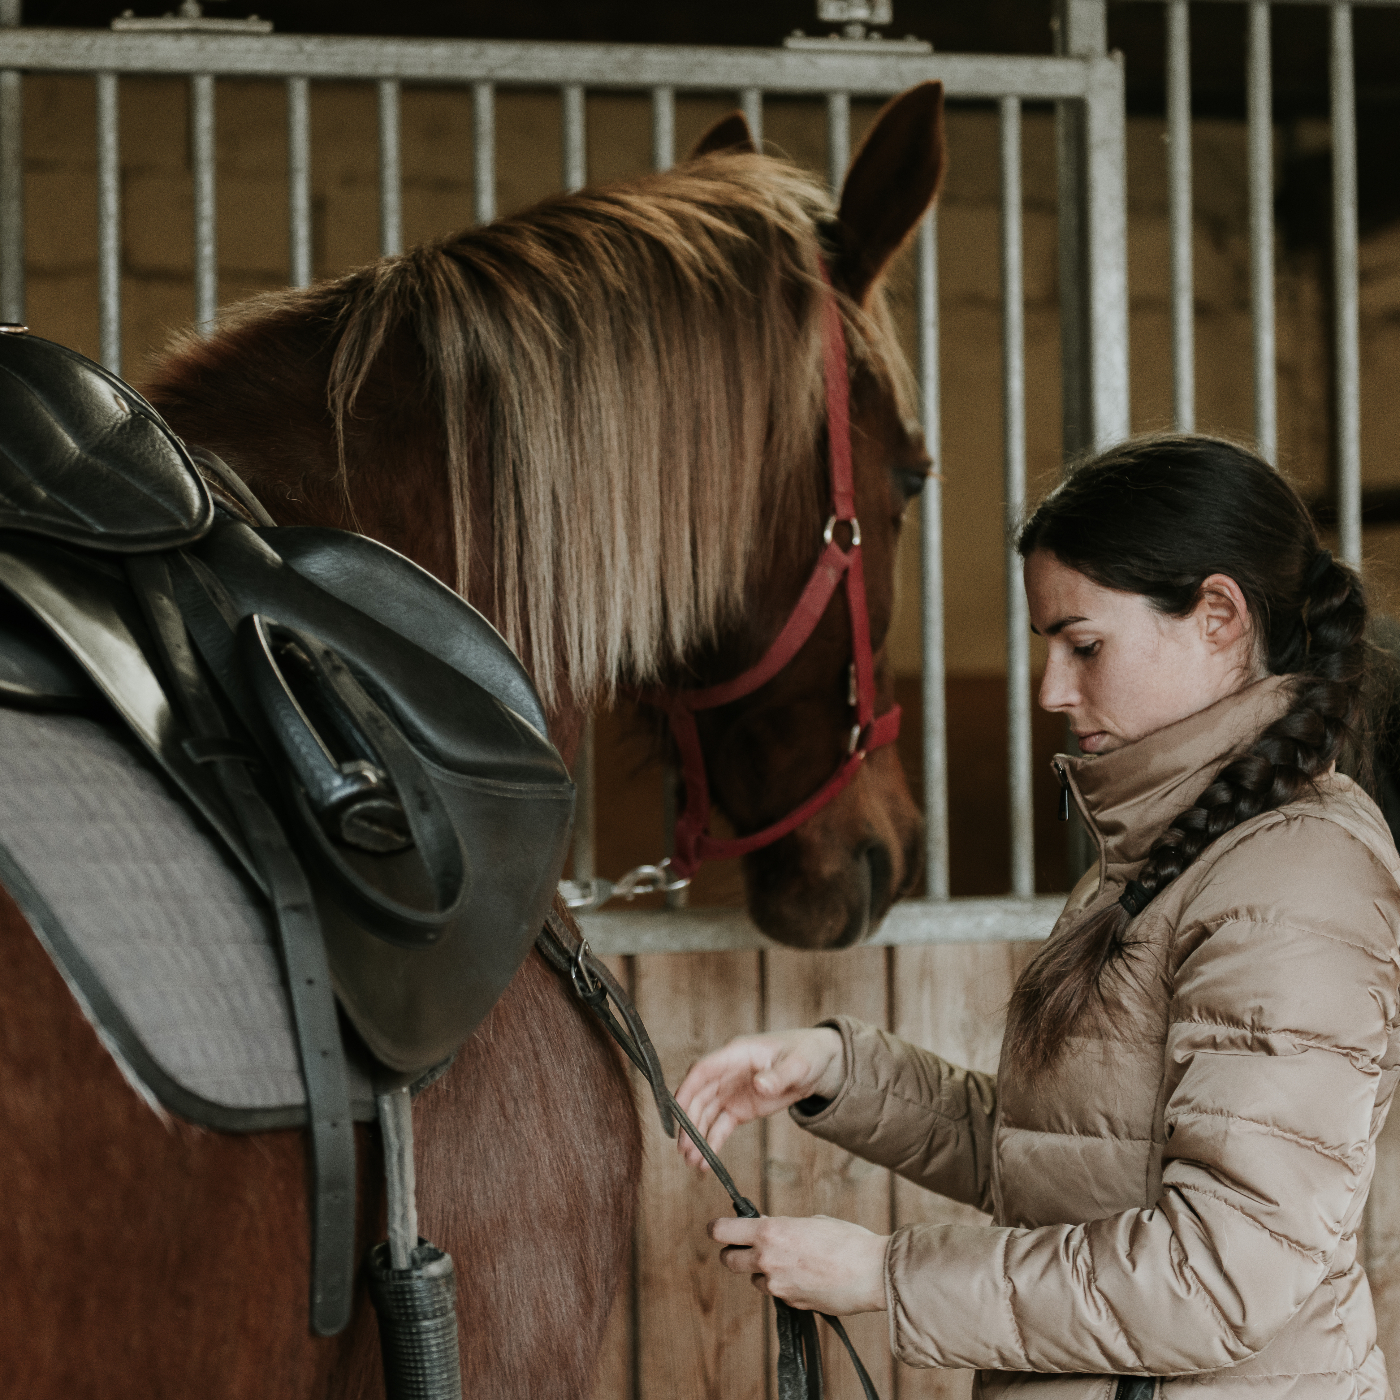 A new horse owner tacking up a horse with saddle and breastcollar, tacking up is when many horses show affection towards their owner.